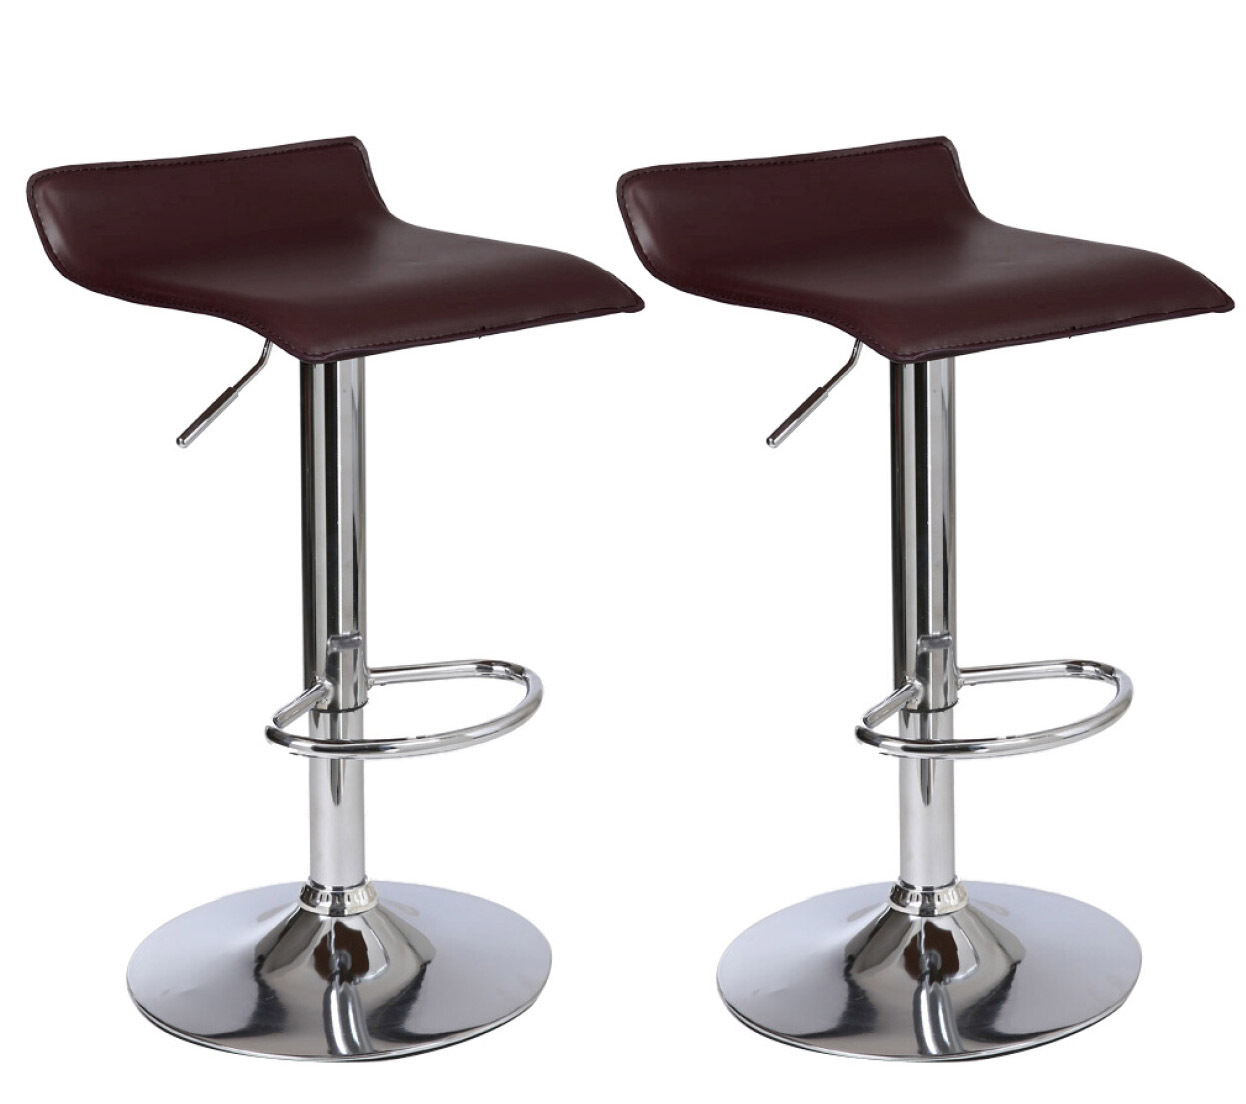 2 x Contemporary PU Leather Kitchen Bar Stools (Chocolate -Set of 2)